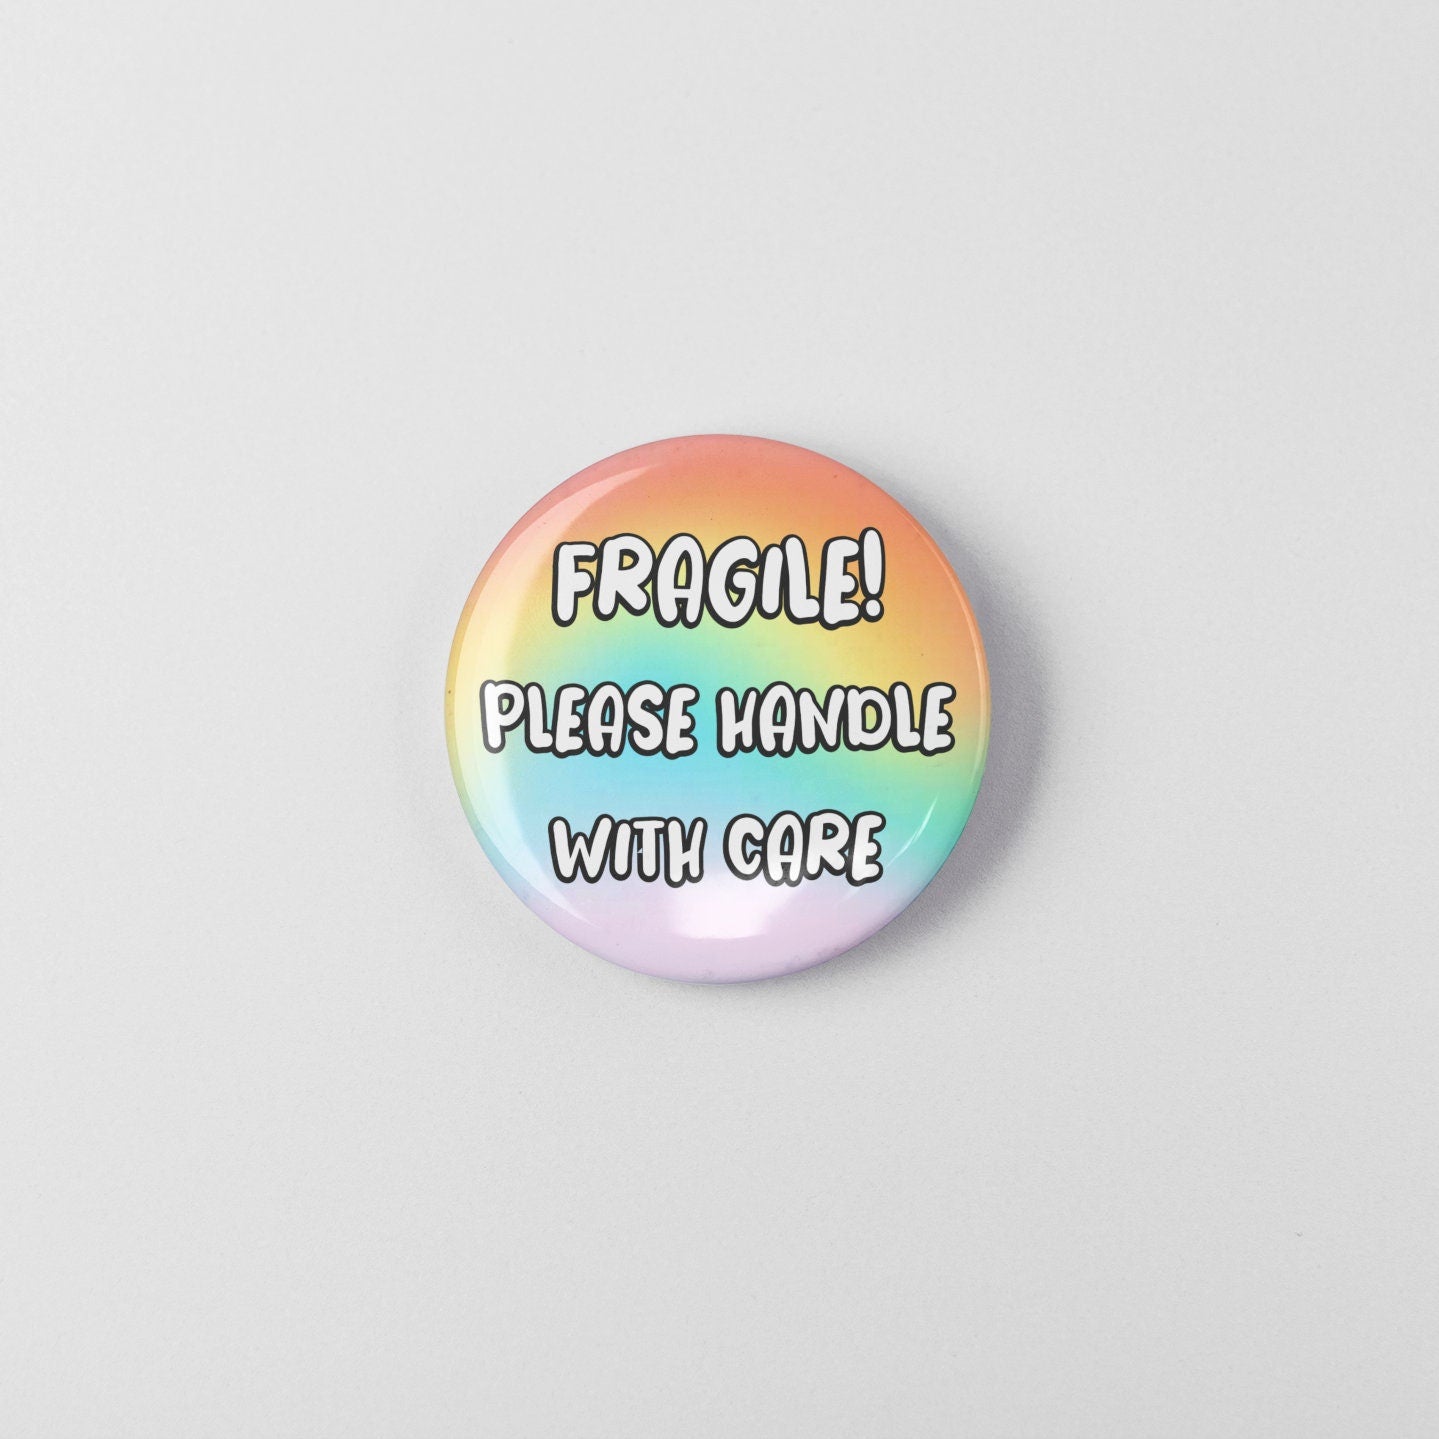 Fragile! Please Handle With Care - Badge Pin | Friendship Gifts, Positive Gift, Pins